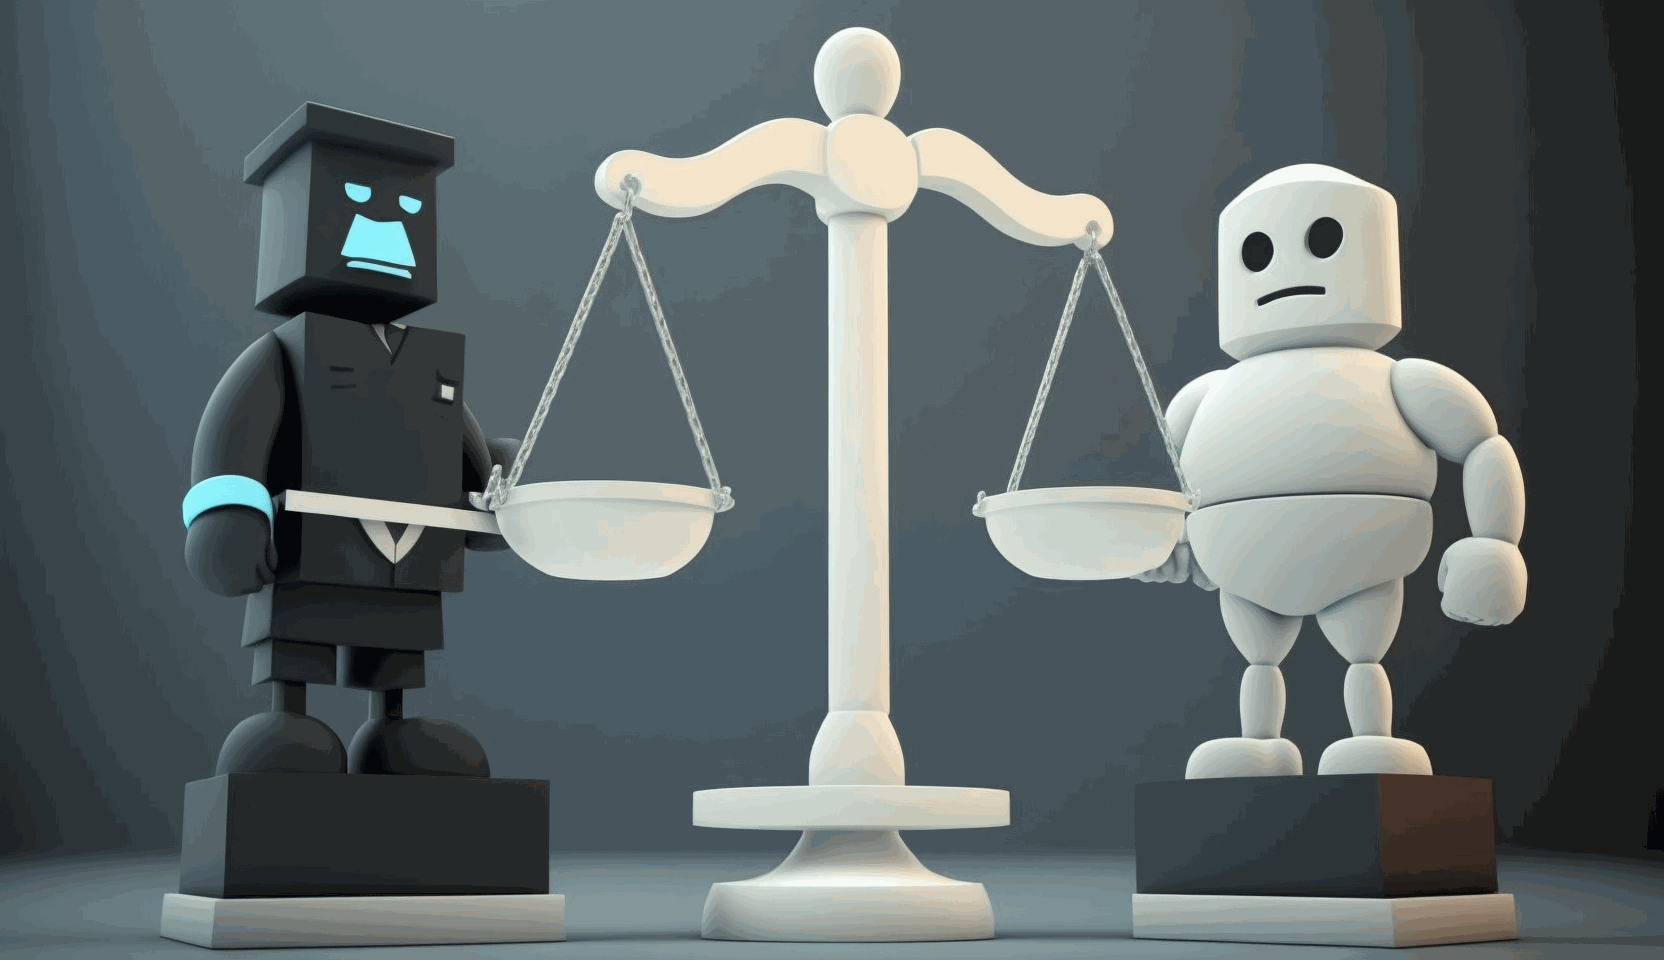 A cartoon-style image of two contrasting characters representing open-source and commercial security tools, standing on opposite sides of a balanced scale, symbolizing the pros and cons of each option.